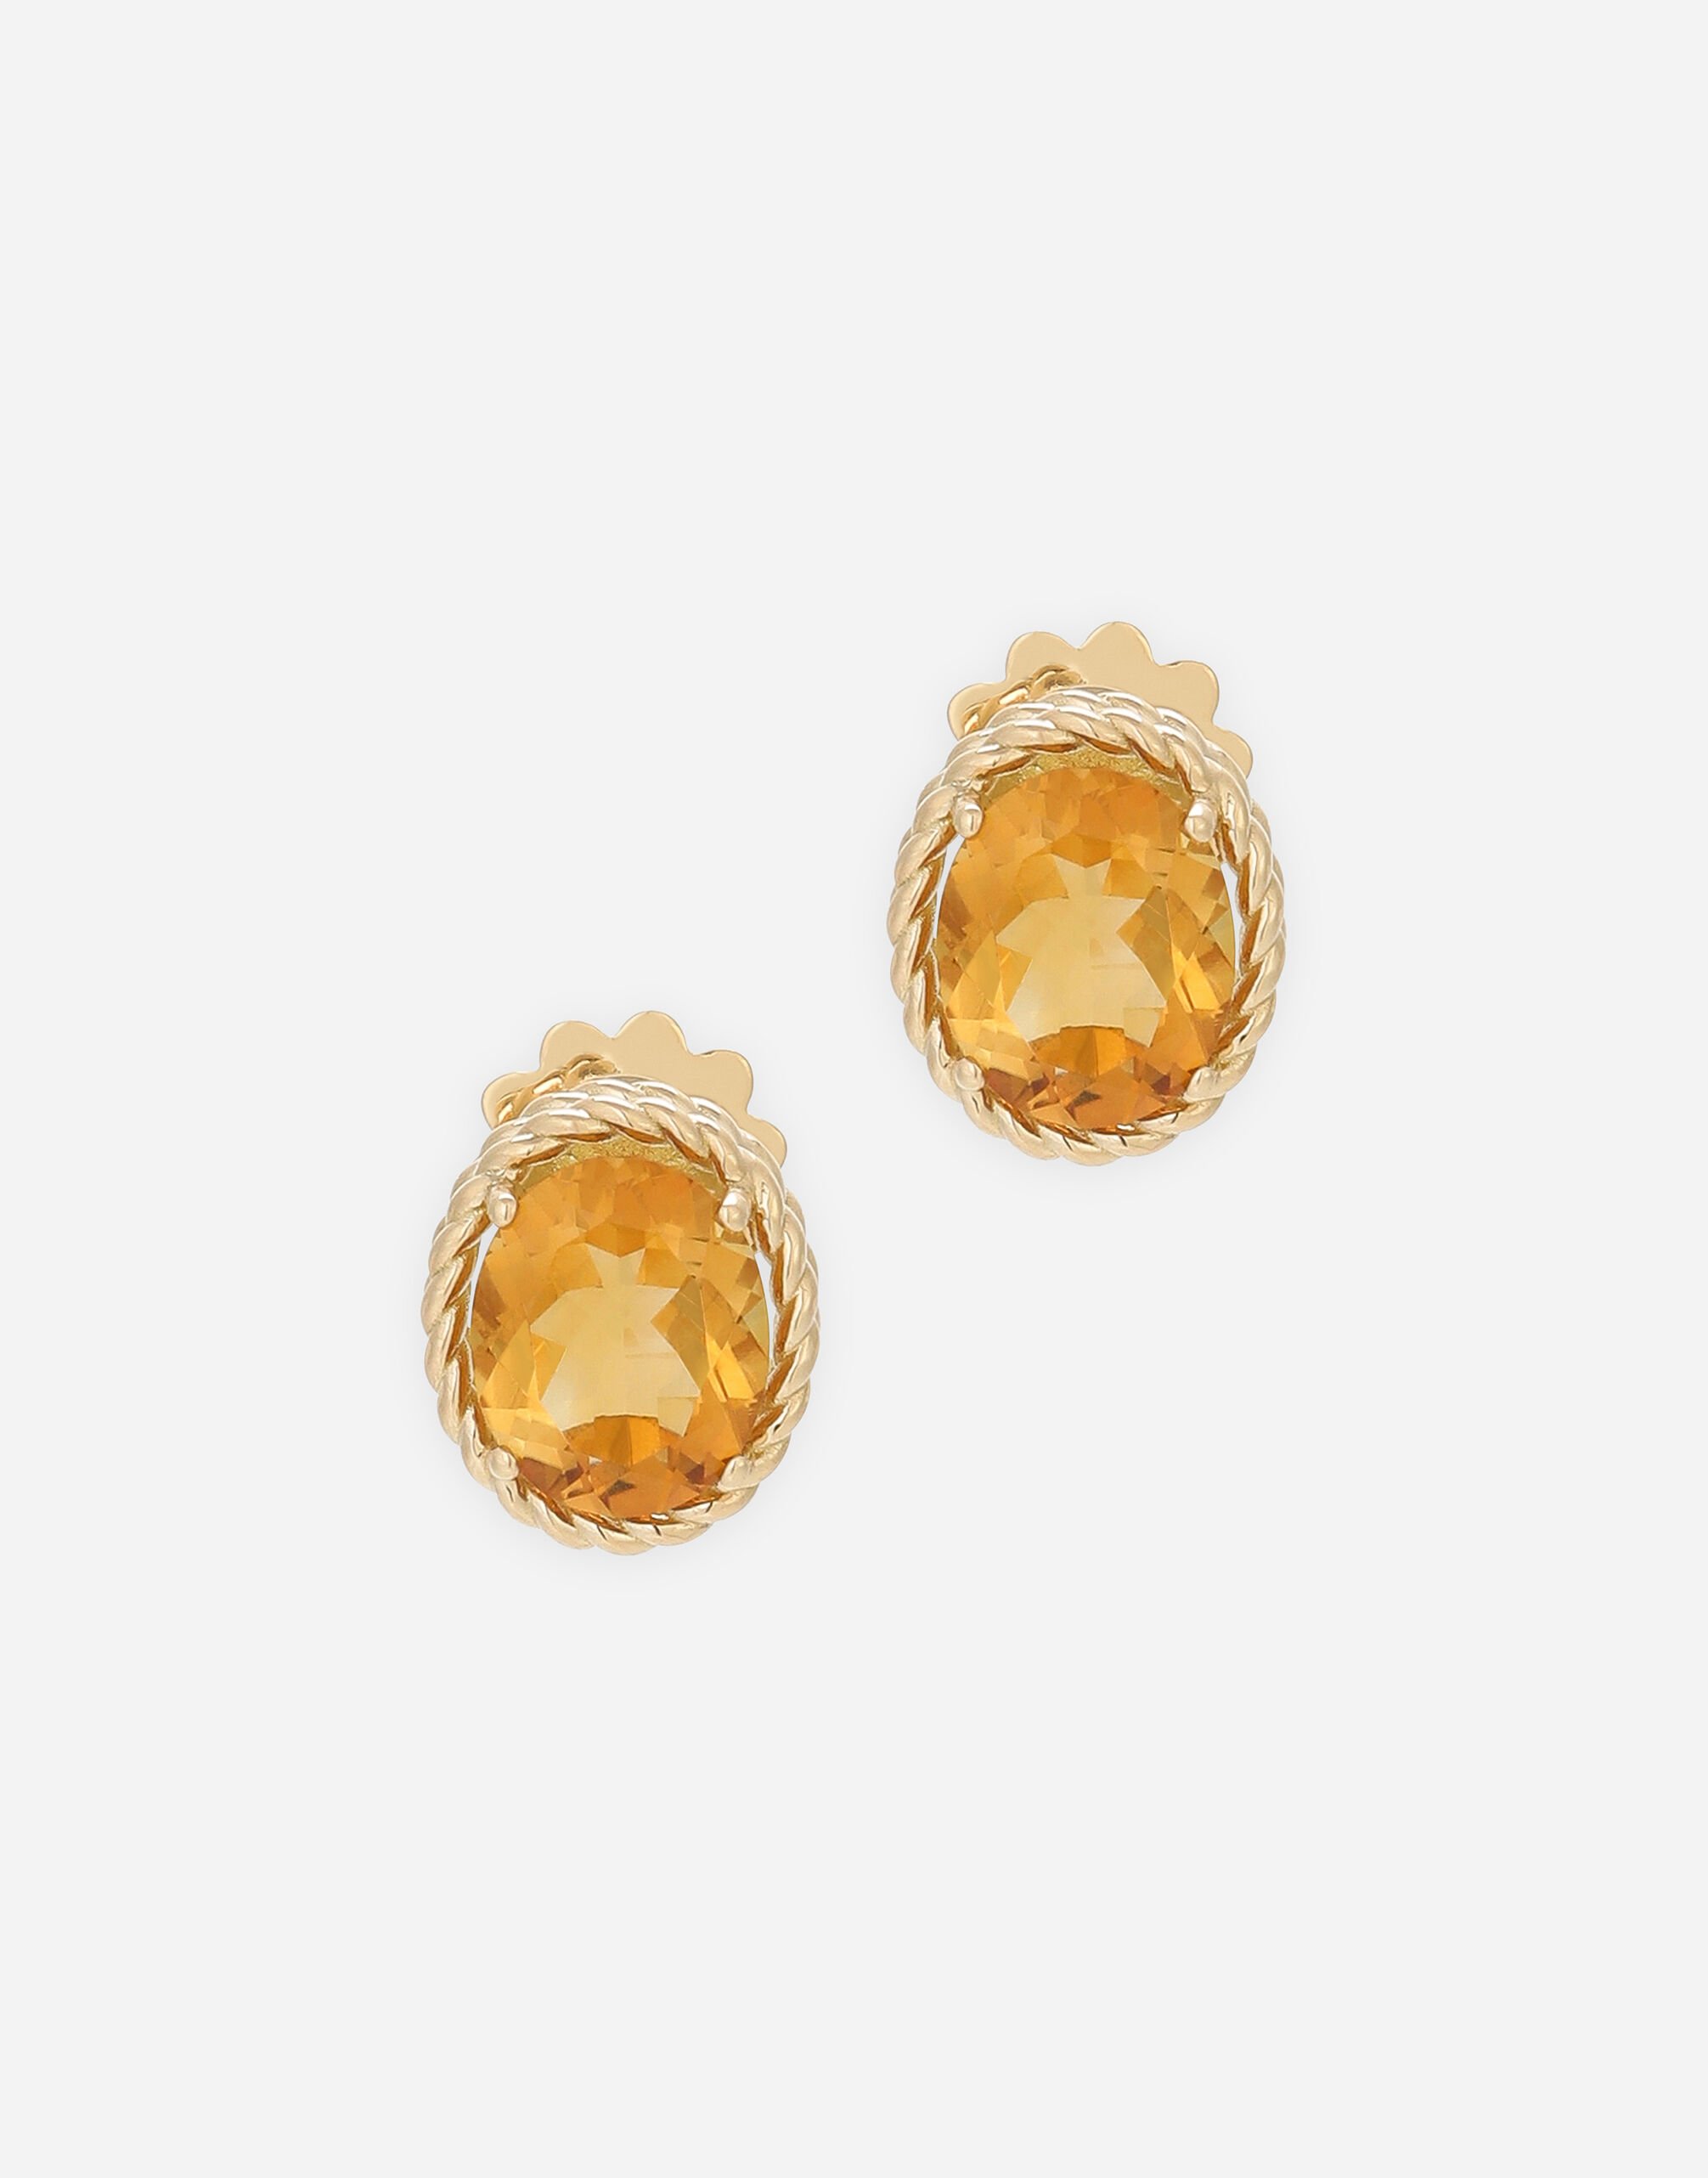 Dolce & Gabbana Anna earrings in yellow gold 18kt with citrines Weiss WEQD4GWPAVE